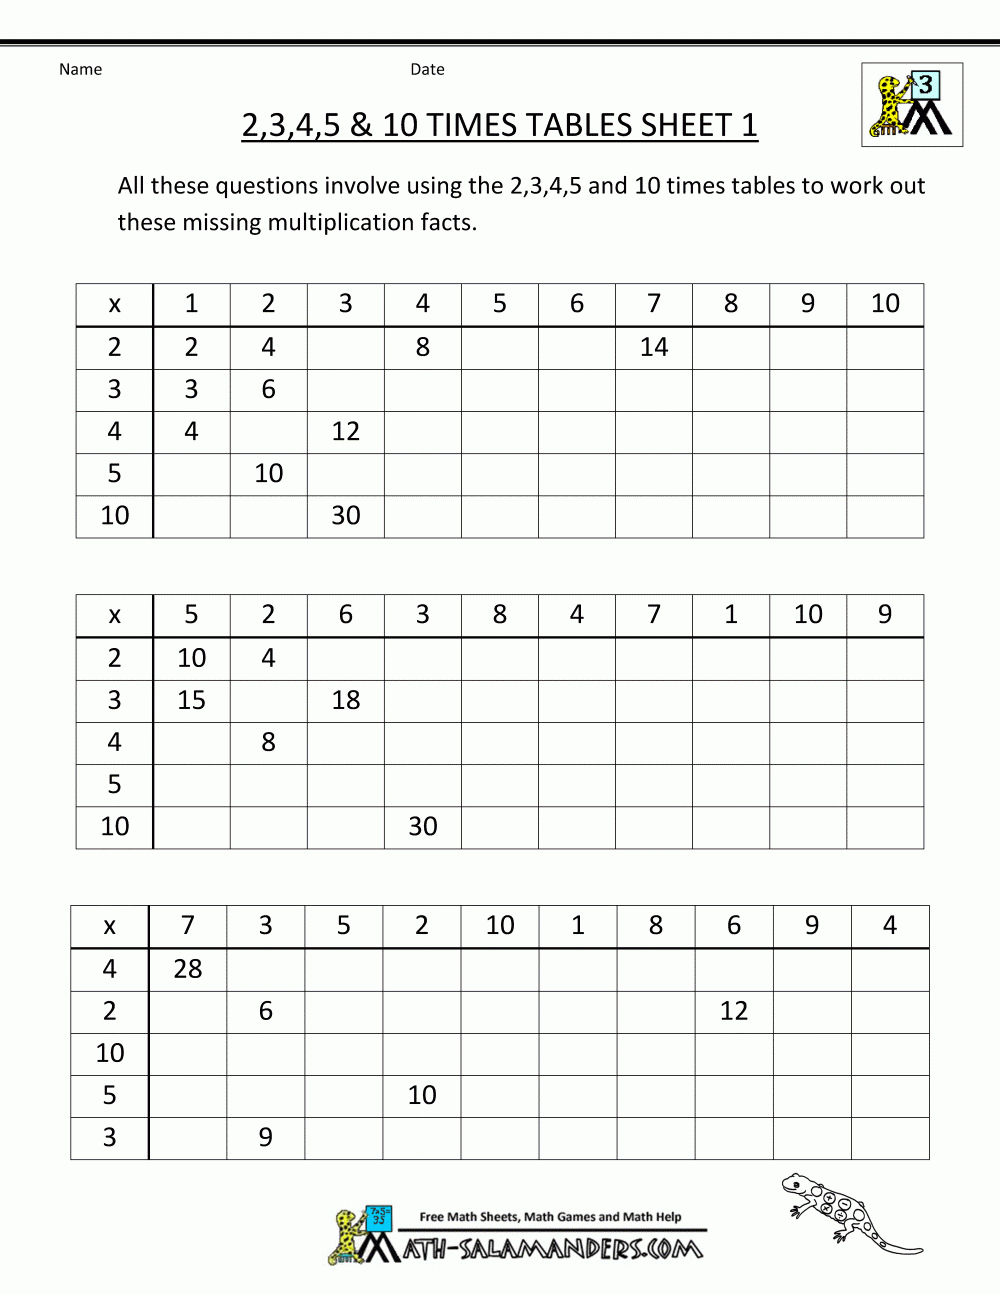 Free Math Sheets Multiplication 2 3 4 5 10 Times Tables 1 - Free Printable Math Multiplication Charts